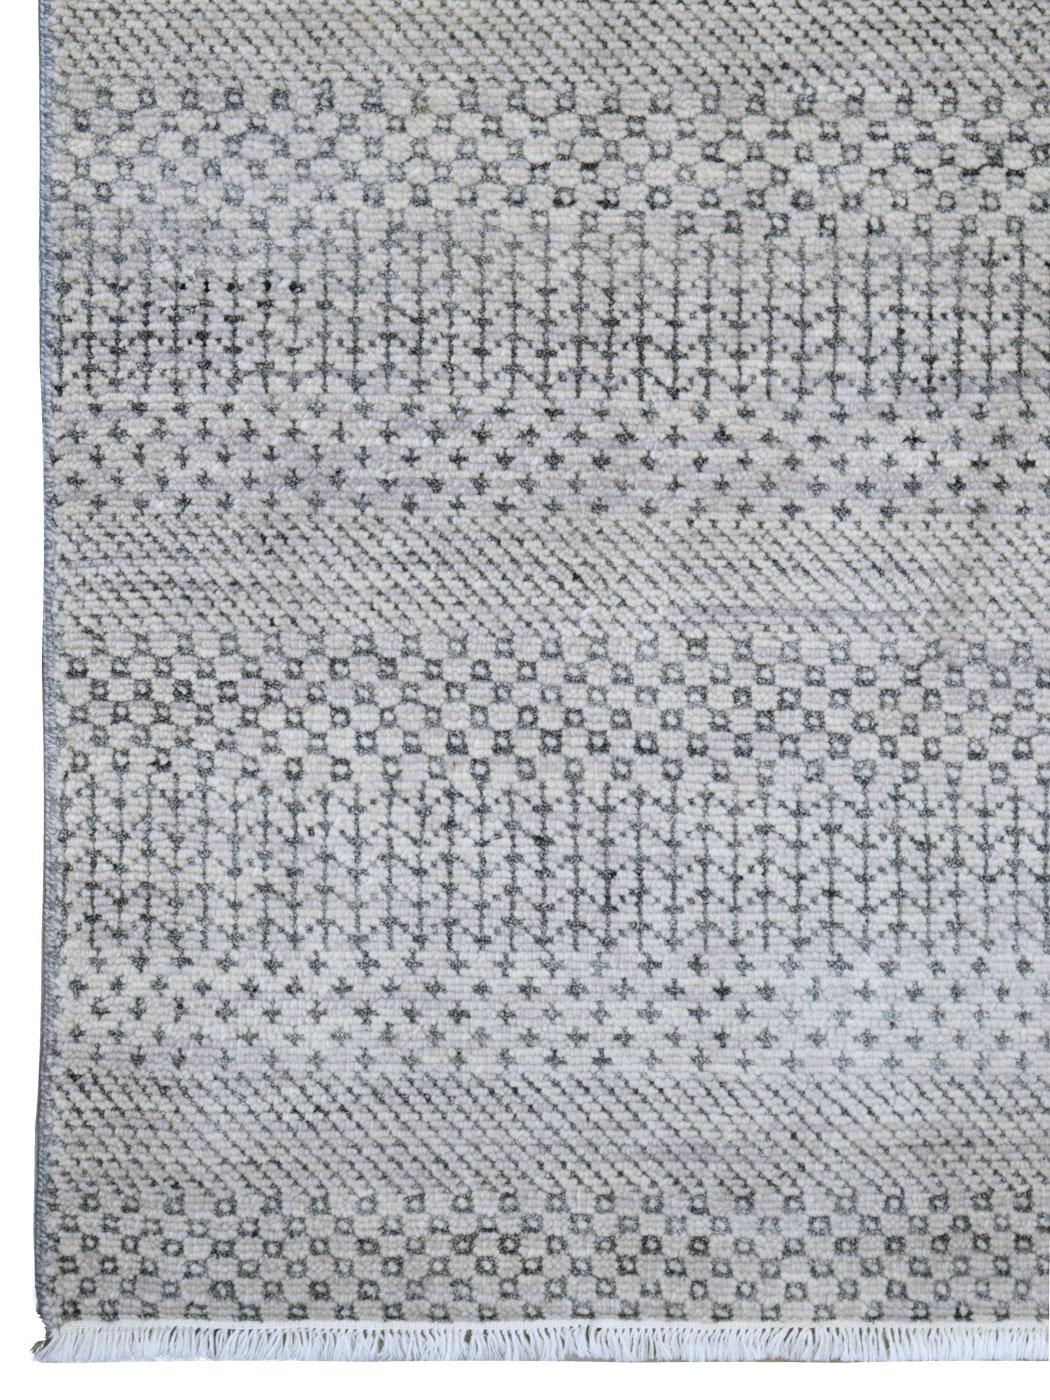 Indian Grey on Grey Modern Hand-Knotted Wool Carpet, 6' x 9' For Sale